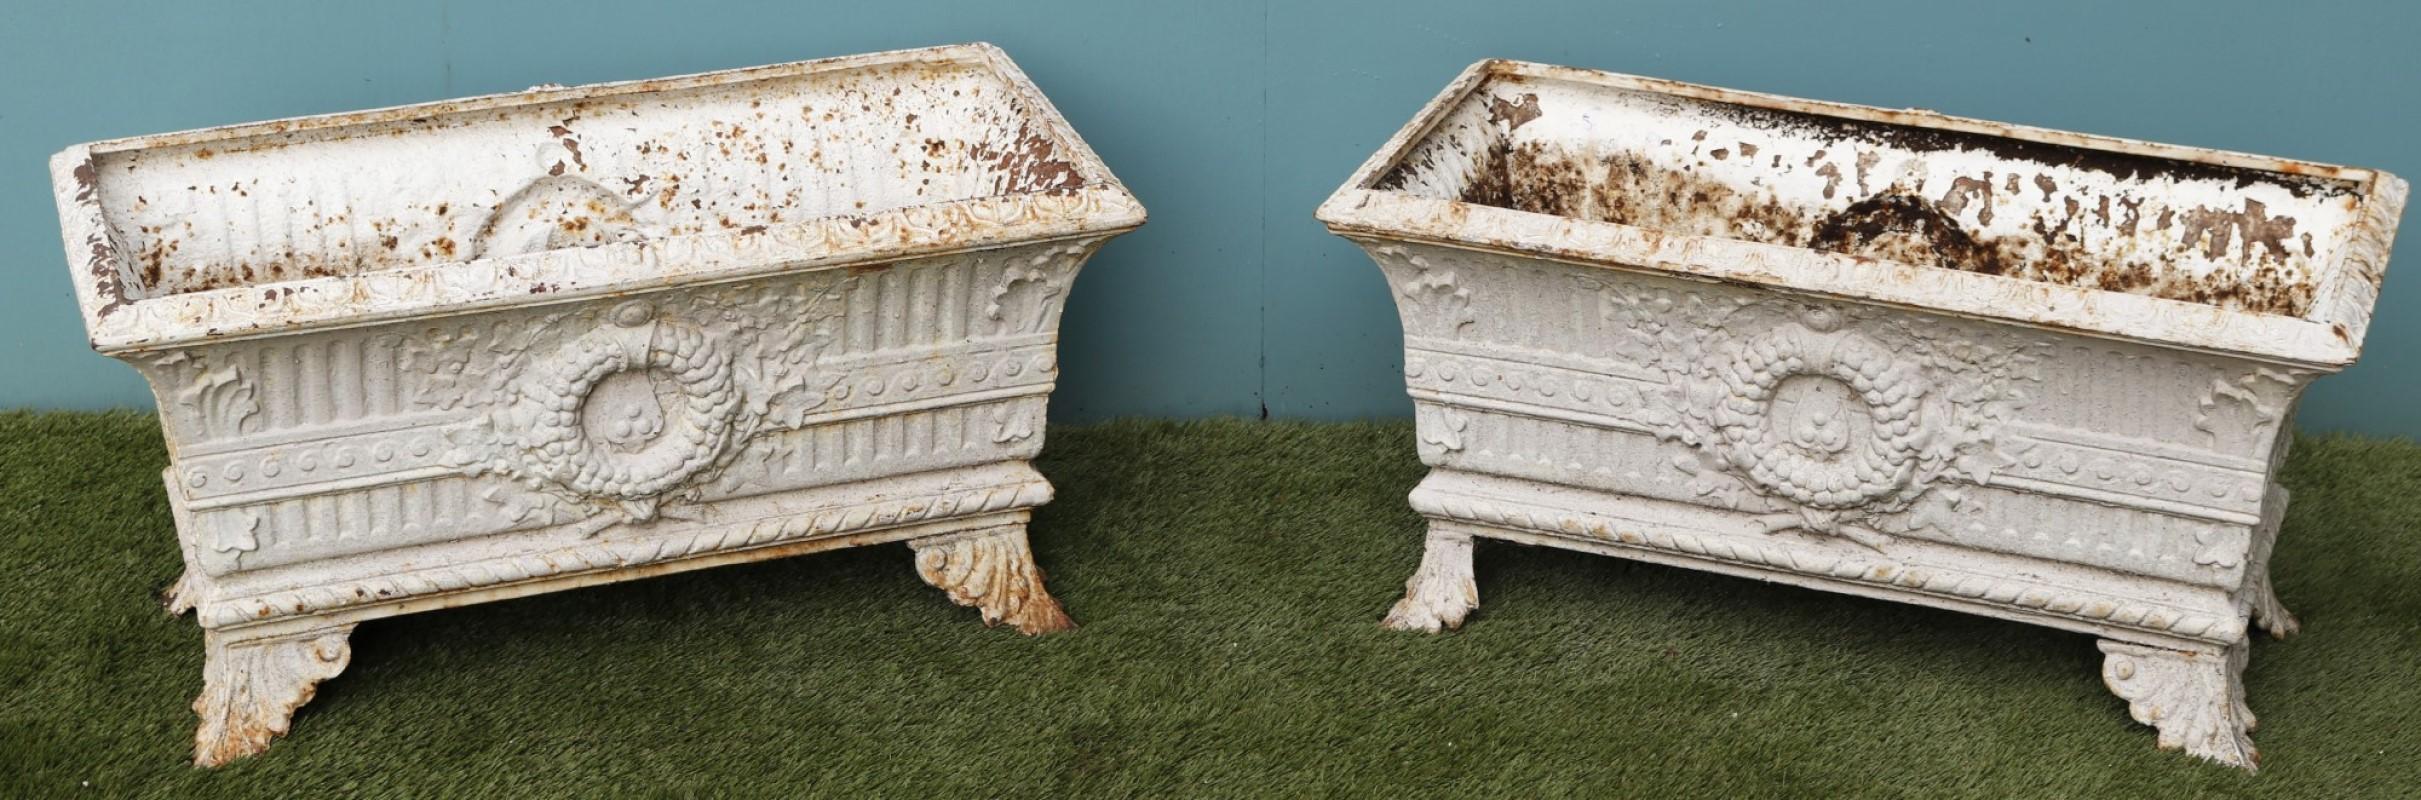 Pair of Antique Cast Iron Garden Planters In Fair Condition For Sale In Wormelow, Herefordshire